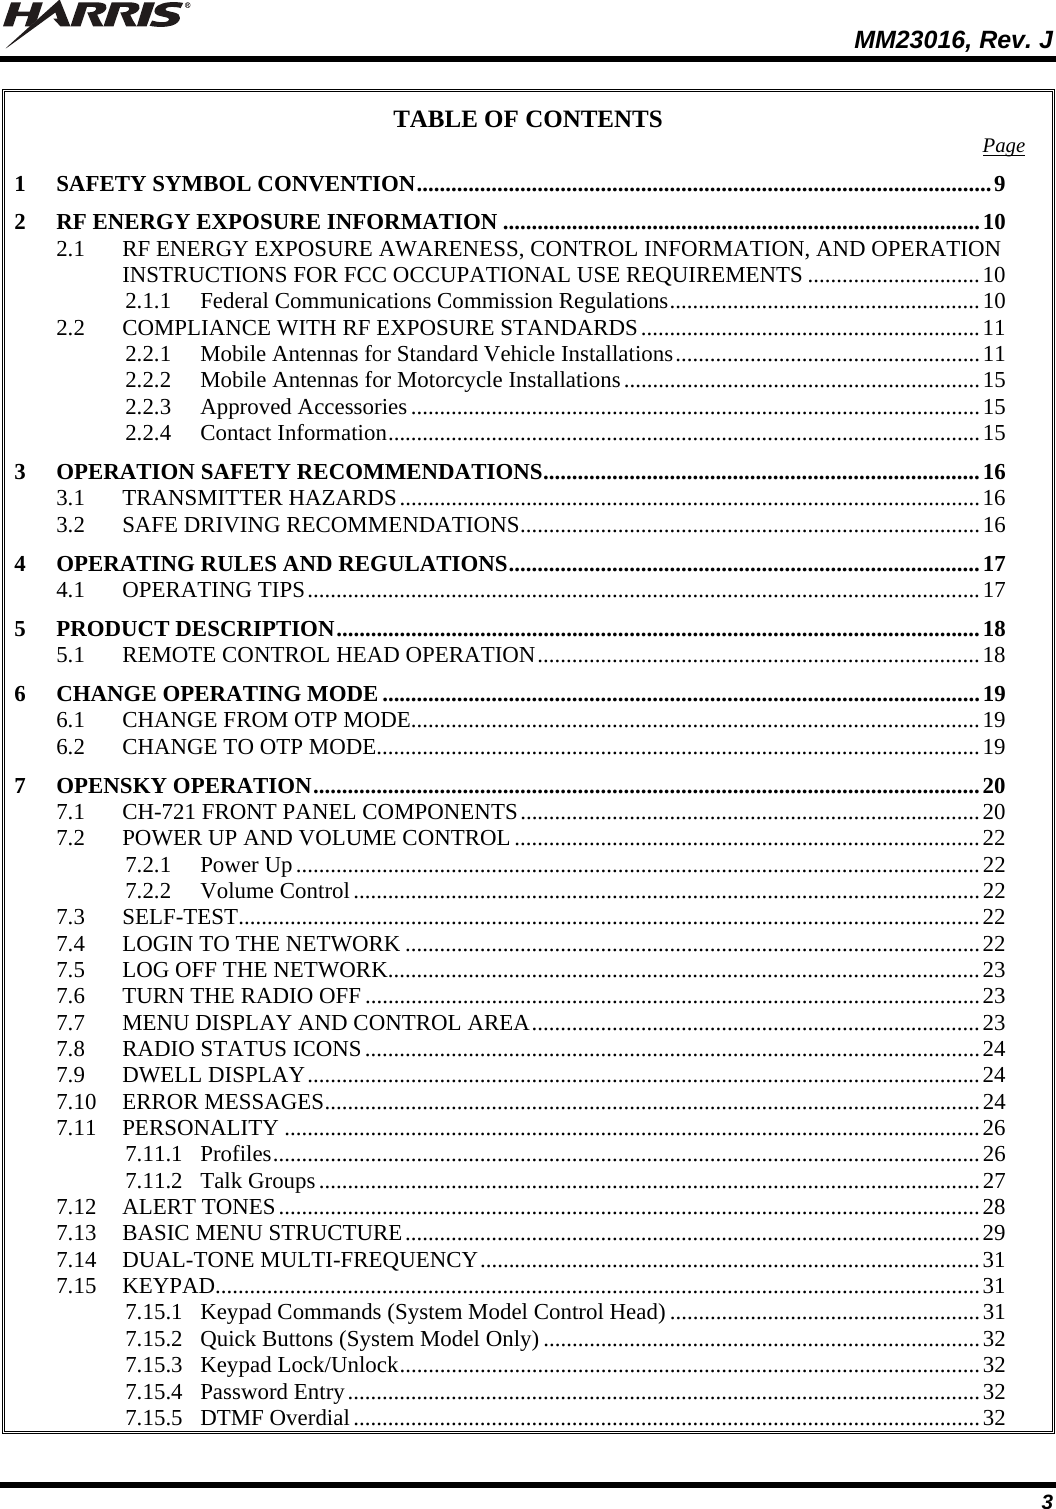  MM23016, Rev. J 3 TABLE OF CONTENTS  Page 1 SAFETY SYMBOL CONVENTION....................................................................................................9 2 RF ENERGY EXPOSURE INFORMATION ...................................................................................10 2.1 RF ENERGY EXPOSURE AWARENESS, CONTROL INFORMATION, AND OPERATION INSTRUCTIONS FOR FCC OCCUPATIONAL USE REQUIREMENTS ..............................10 2.1.1 Federal Communications Commission Regulations......................................................10 2.2 COMPLIANCE WITH RF EXPOSURE STANDARDS...........................................................11 2.2.1 Mobile Antennas for Standard Vehicle Installations.....................................................11 2.2.2 Mobile Antennas for Motorcycle Installations..............................................................15 2.2.3 Approved Accessories...................................................................................................15 2.2.4 Contact Information.......................................................................................................15 3 OPERATION SAFETY RECOMMENDATIONS............................................................................16 3.1 TRANSMITTER HAZARDS.....................................................................................................16 3.2 SAFE DRIVING RECOMMENDATIONS................................................................................16 4 OPERATING RULES AND REGULATIONS..................................................................................17 4.1 OPERATING TIPS.....................................................................................................................17 5 PRODUCT DESCRIPTION................................................................................................................18 5.1 REMOTE CONTROL HEAD OPERATION.............................................................................18 6 CHANGE OPERATING MODE ........................................................................................................19 6.1 CHANGE FROM OTP MODE...................................................................................................19 6.2 CHANGE TO OTP MODE.........................................................................................................19 7 OPENSKY OPERATION....................................................................................................................20 7.1 CH-721 FRONT PANEL COMPONENTS................................................................................20 7.2 POWER UP AND VOLUME CONTROL .................................................................................22 7.2.1 Power Up.......................................................................................................................22 7.2.2 Volume Control.............................................................................................................22 7.3 SELF-TEST.................................................................................................................................22 7.4 LOGIN TO THE NETWORK ....................................................................................................22 7.5 LOG OFF THE NETWORK.......................................................................................................23 7.6 TURN THE RADIO OFF ...........................................................................................................23 7.7 MENU DISPLAY AND CONTROL AREA..............................................................................23 7.8 RADIO STATUS ICONS...........................................................................................................24 7.9 DWELL DISPLAY.....................................................................................................................24 7.10 ERROR MESSAGES..................................................................................................................24 7.11 PERSONALITY .........................................................................................................................26 7.11.1 Profiles...........................................................................................................................26 7.11.2 Talk Groups...................................................................................................................27 7.12 ALERT TONES..........................................................................................................................28 7.13 BASIC MENU STRUCTURE....................................................................................................29 7.14 DUAL-TONE MULTI-FREQUENCY.......................................................................................31 7.15 KEYPAD.....................................................................................................................................31 7.15.1 Keypad Commands (System Model Control Head)......................................................31 7.15.2 Quick Buttons (System Model Only) ............................................................................32 7.15.3 Keypad Lock/Unlock.....................................................................................................32 7.15.4 Password Entry..............................................................................................................32 7.15.5 DTMF Overdial.............................................................................................................32 